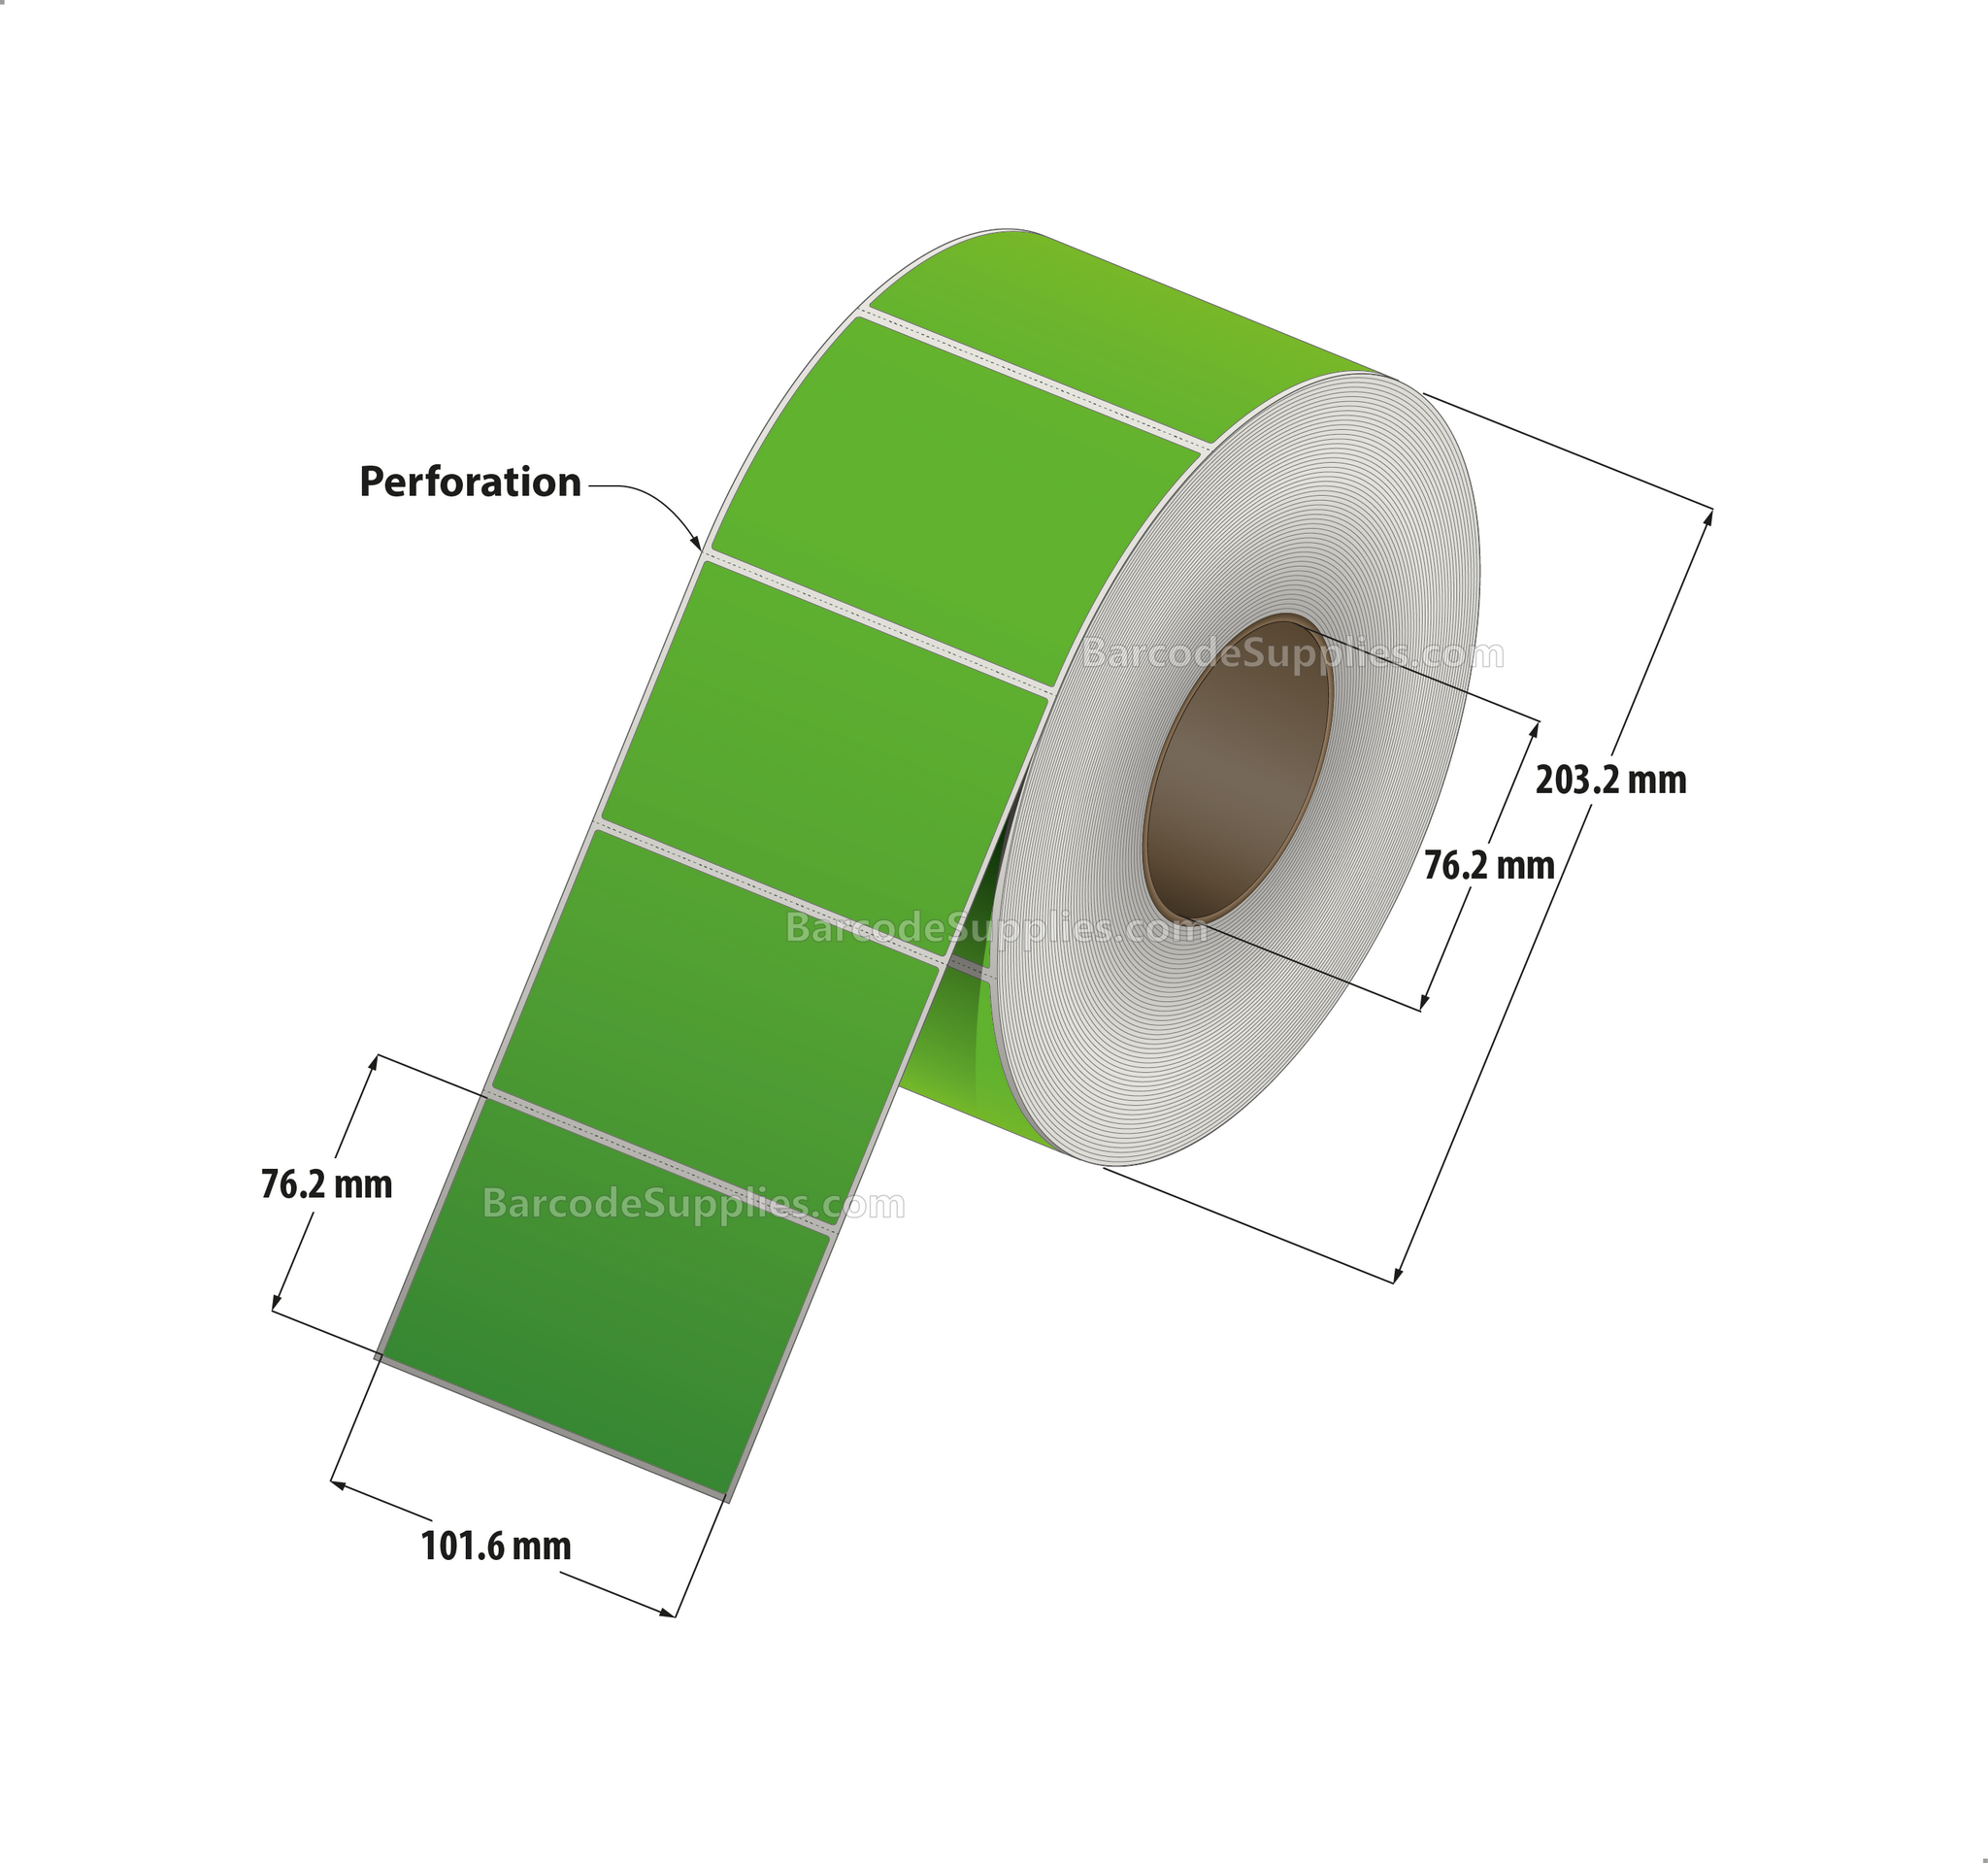 4 x 3 Thermal Transfer Fluorescent Green Labels With Permanent Acrylic Adhesive - Perforated - 1900 Labels Per Roll - Carton Of 4 Rolls - 7600 Labels Total - MPN: TH43-1PFG